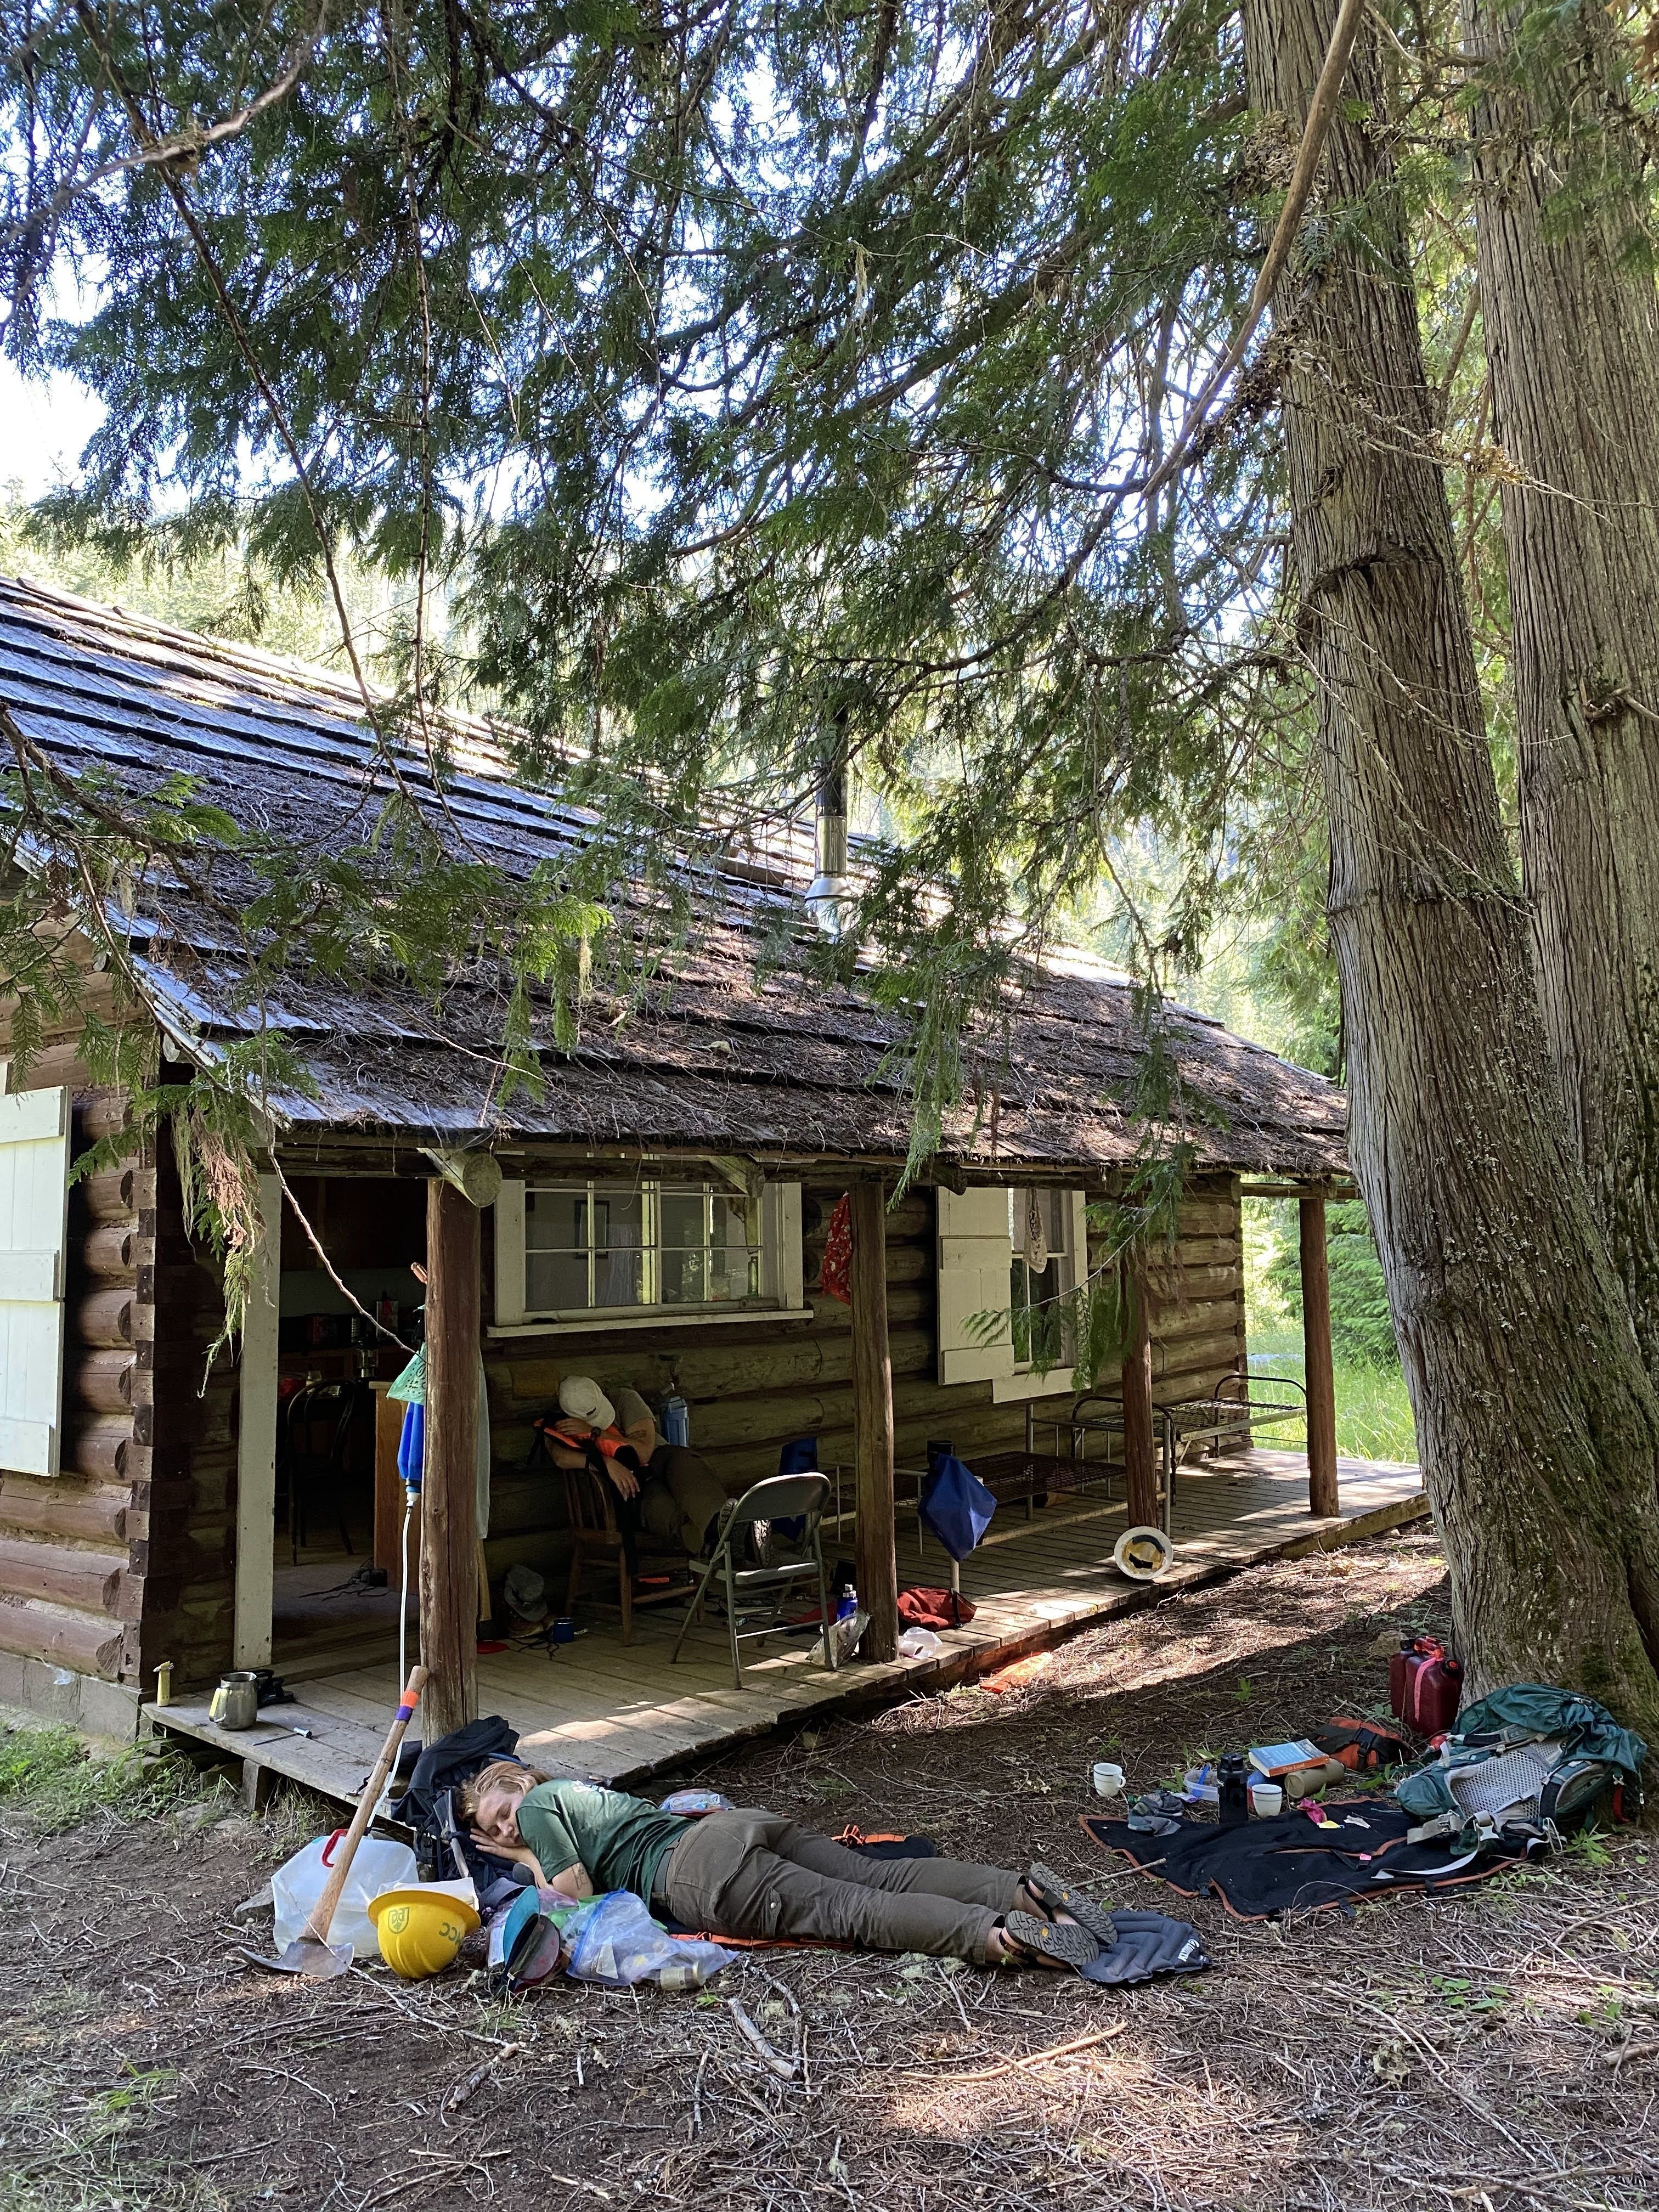 A view of a wood cabin in a standing of cedars. On the ground in front of the cabin, a crew member sleeps. Another sleeps sitting in a chair on the porch of the cabin.